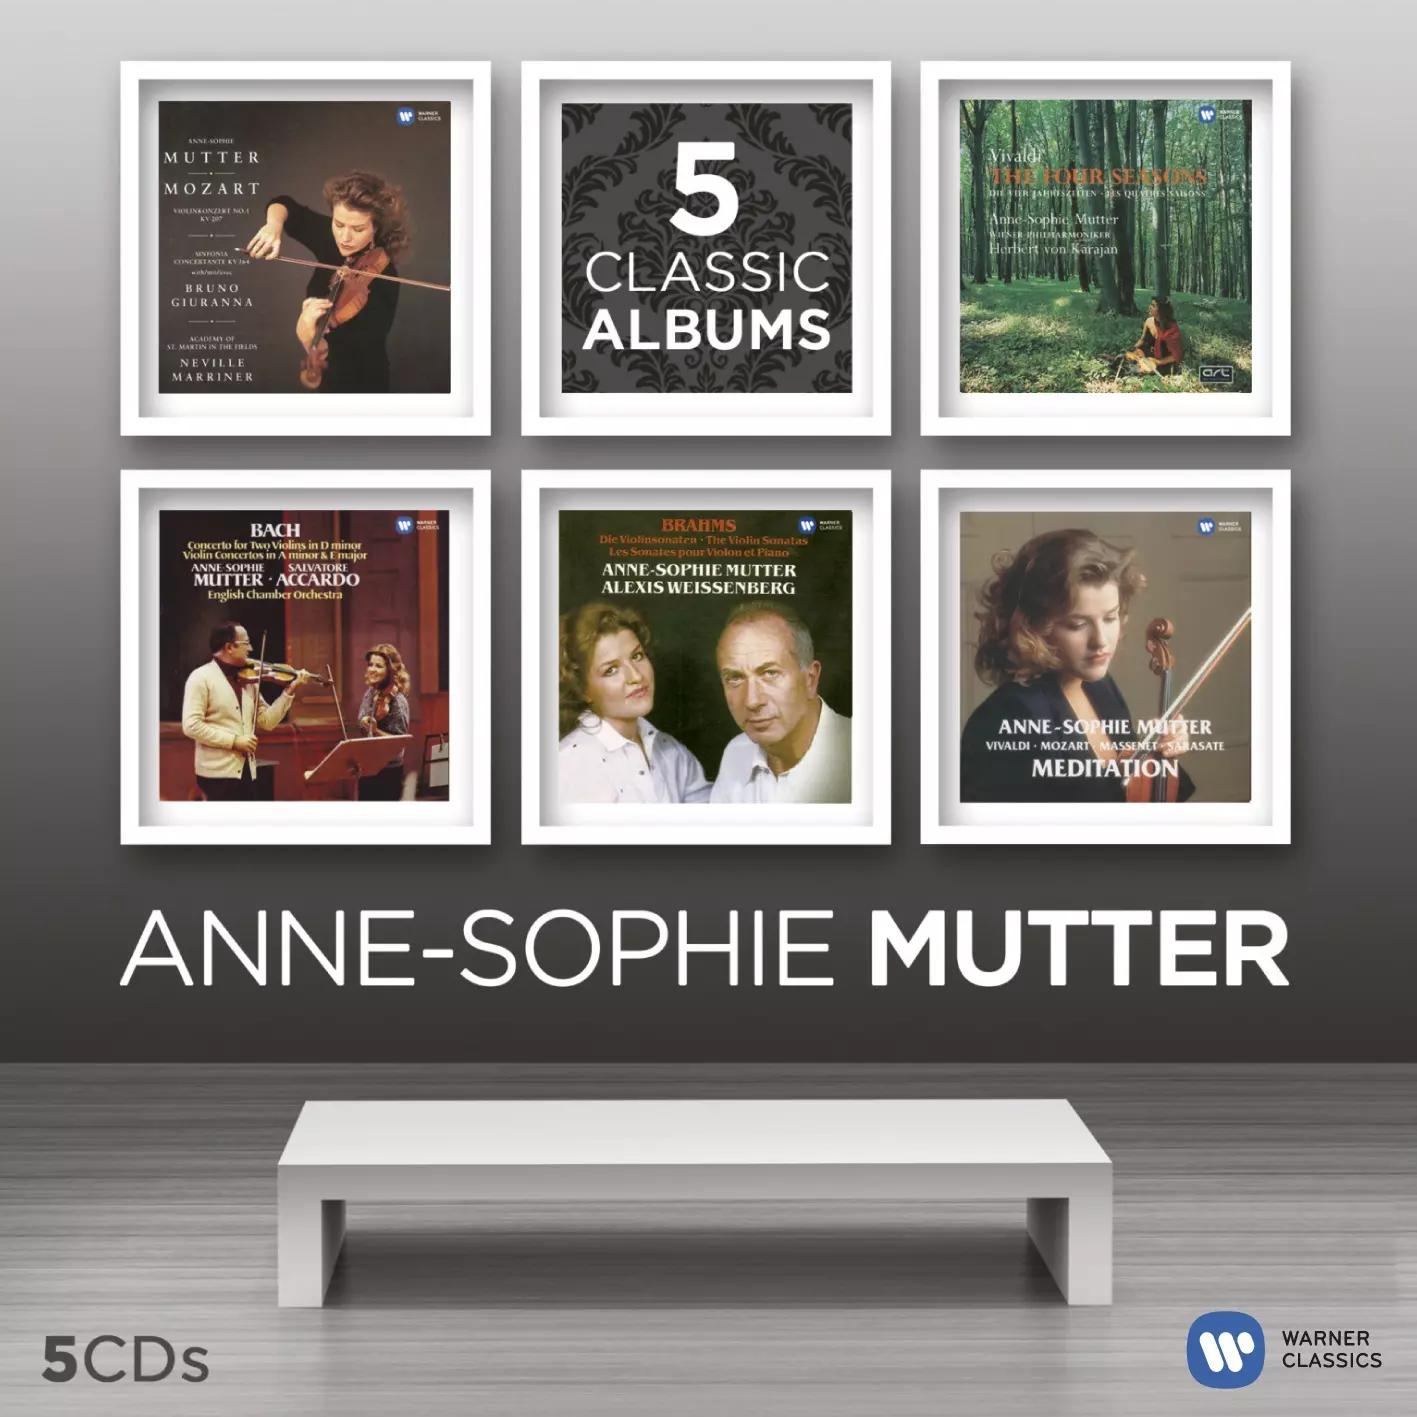 Anne-Sophie Mutter - Five Classic Albums